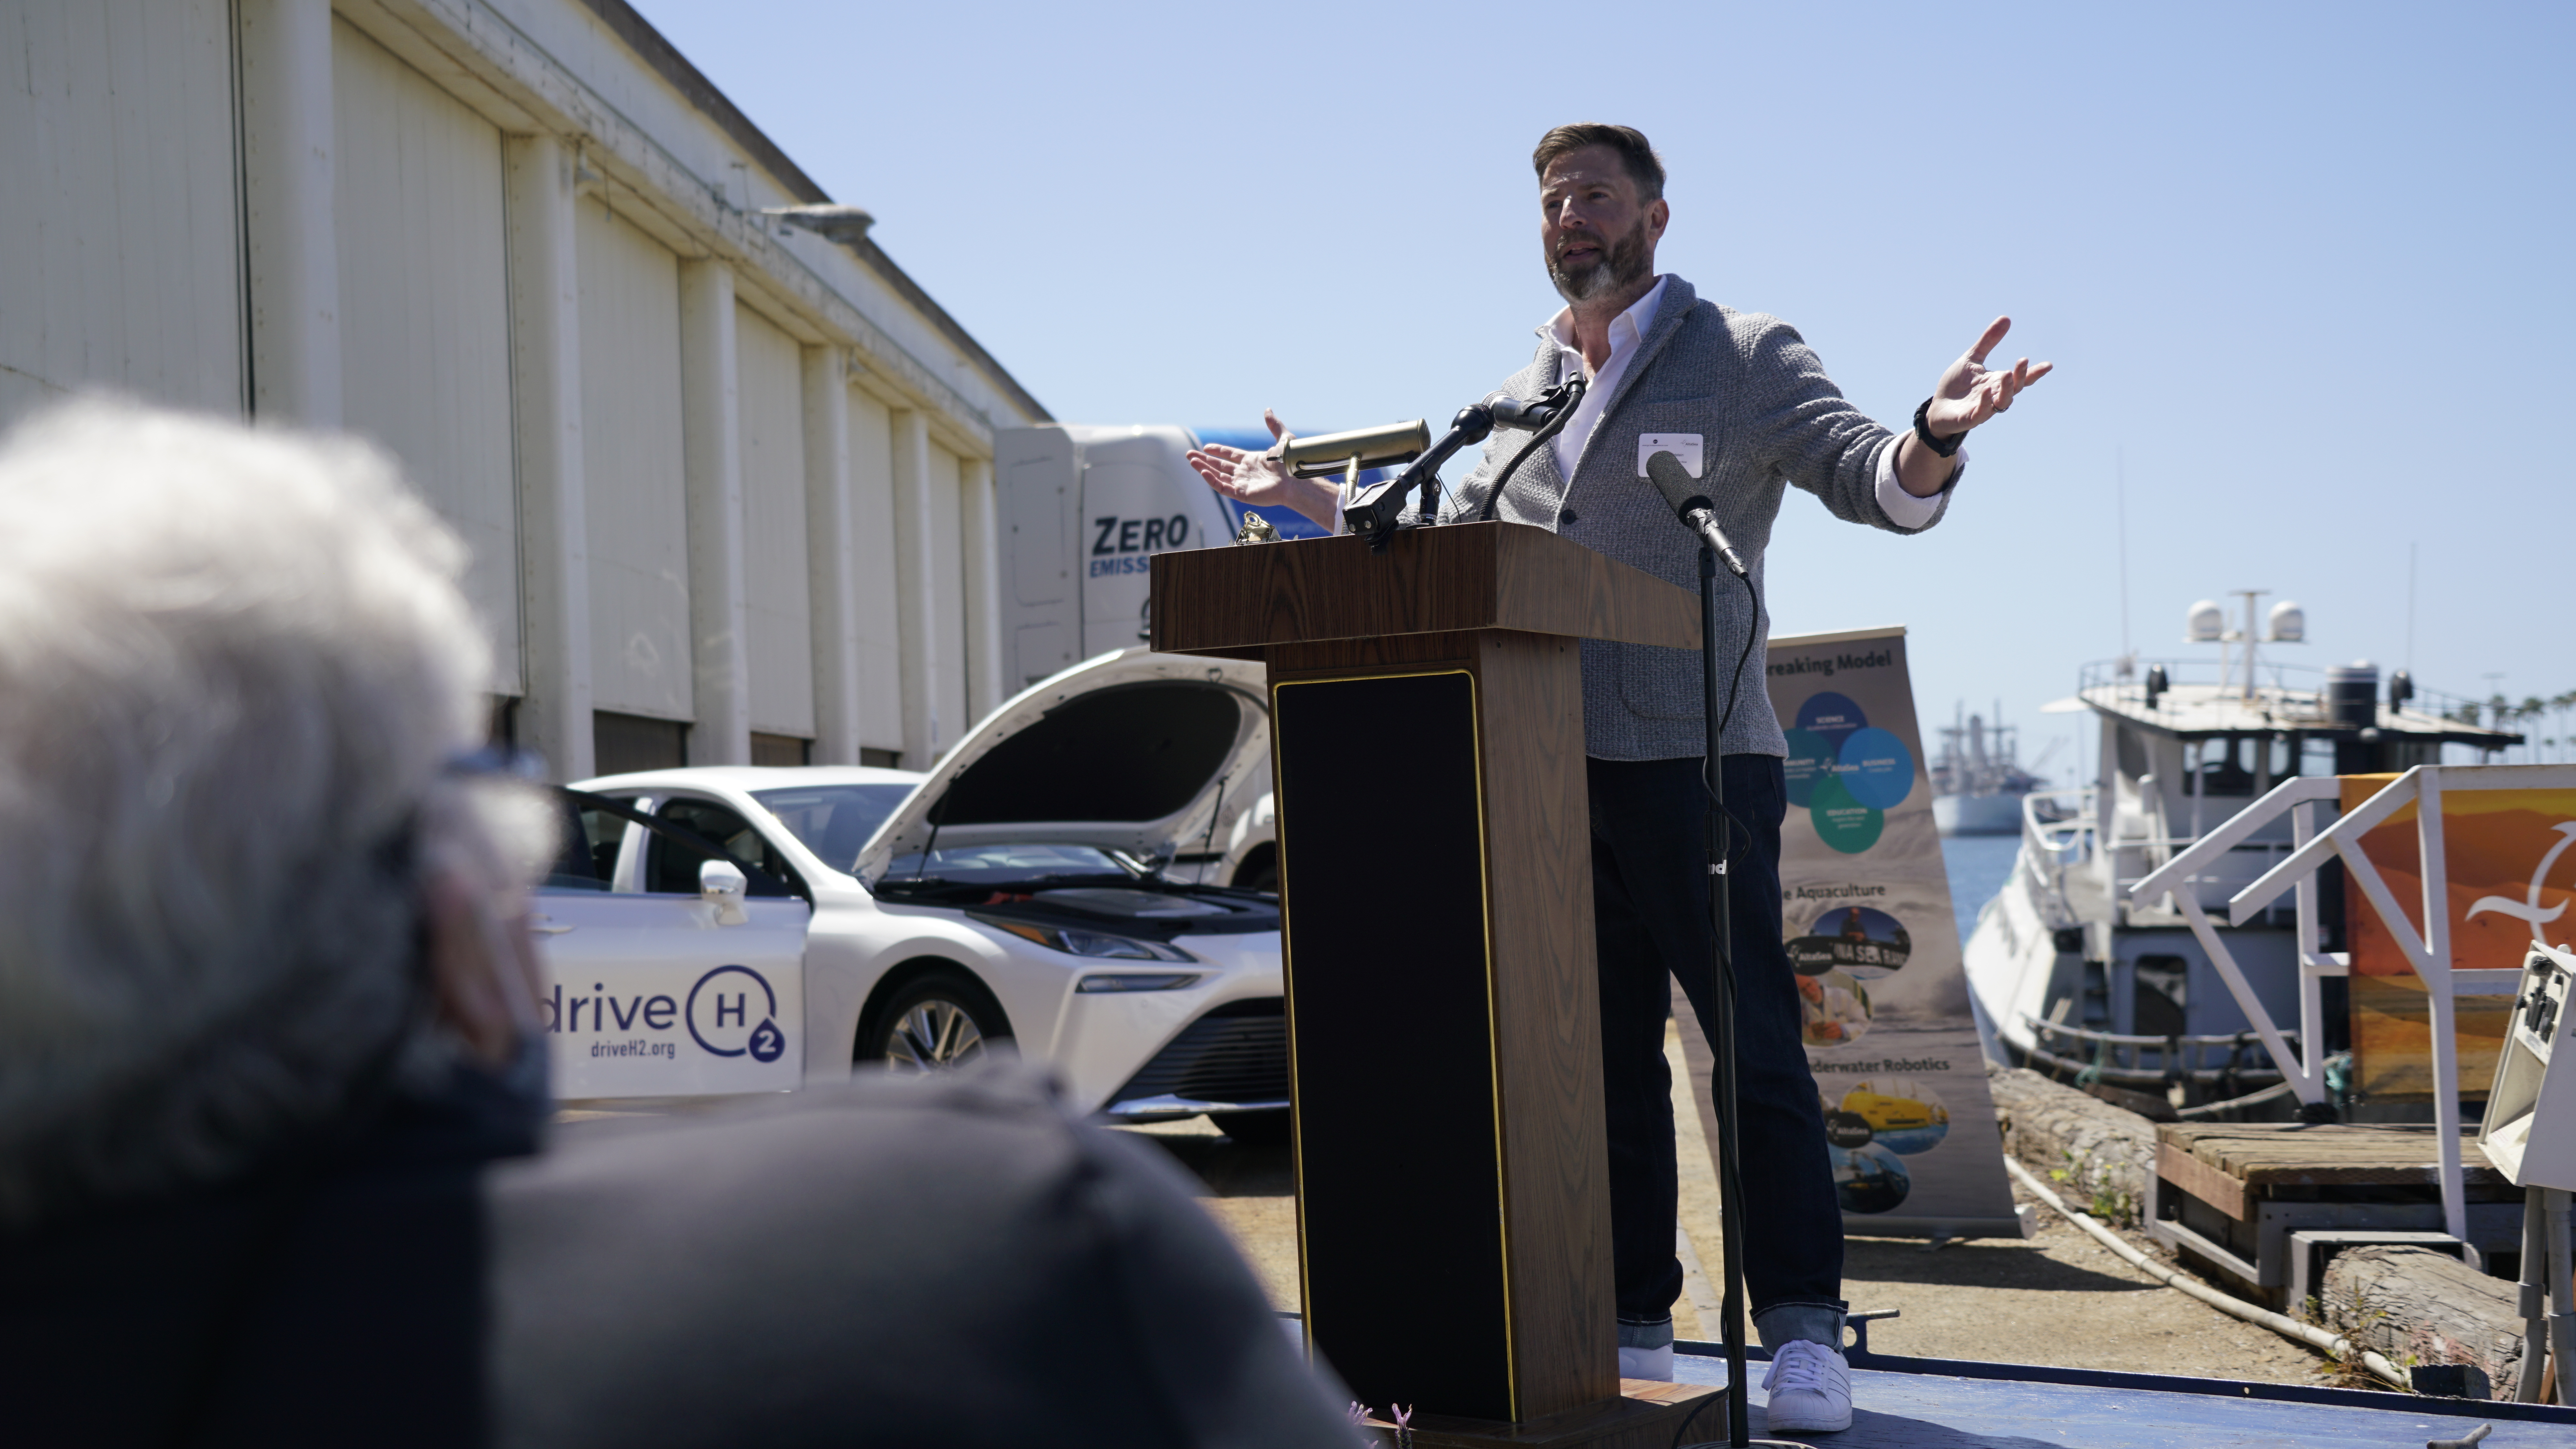 Brian Goldstein speaks to audience at AltaSea in front of fuel cell car & truck